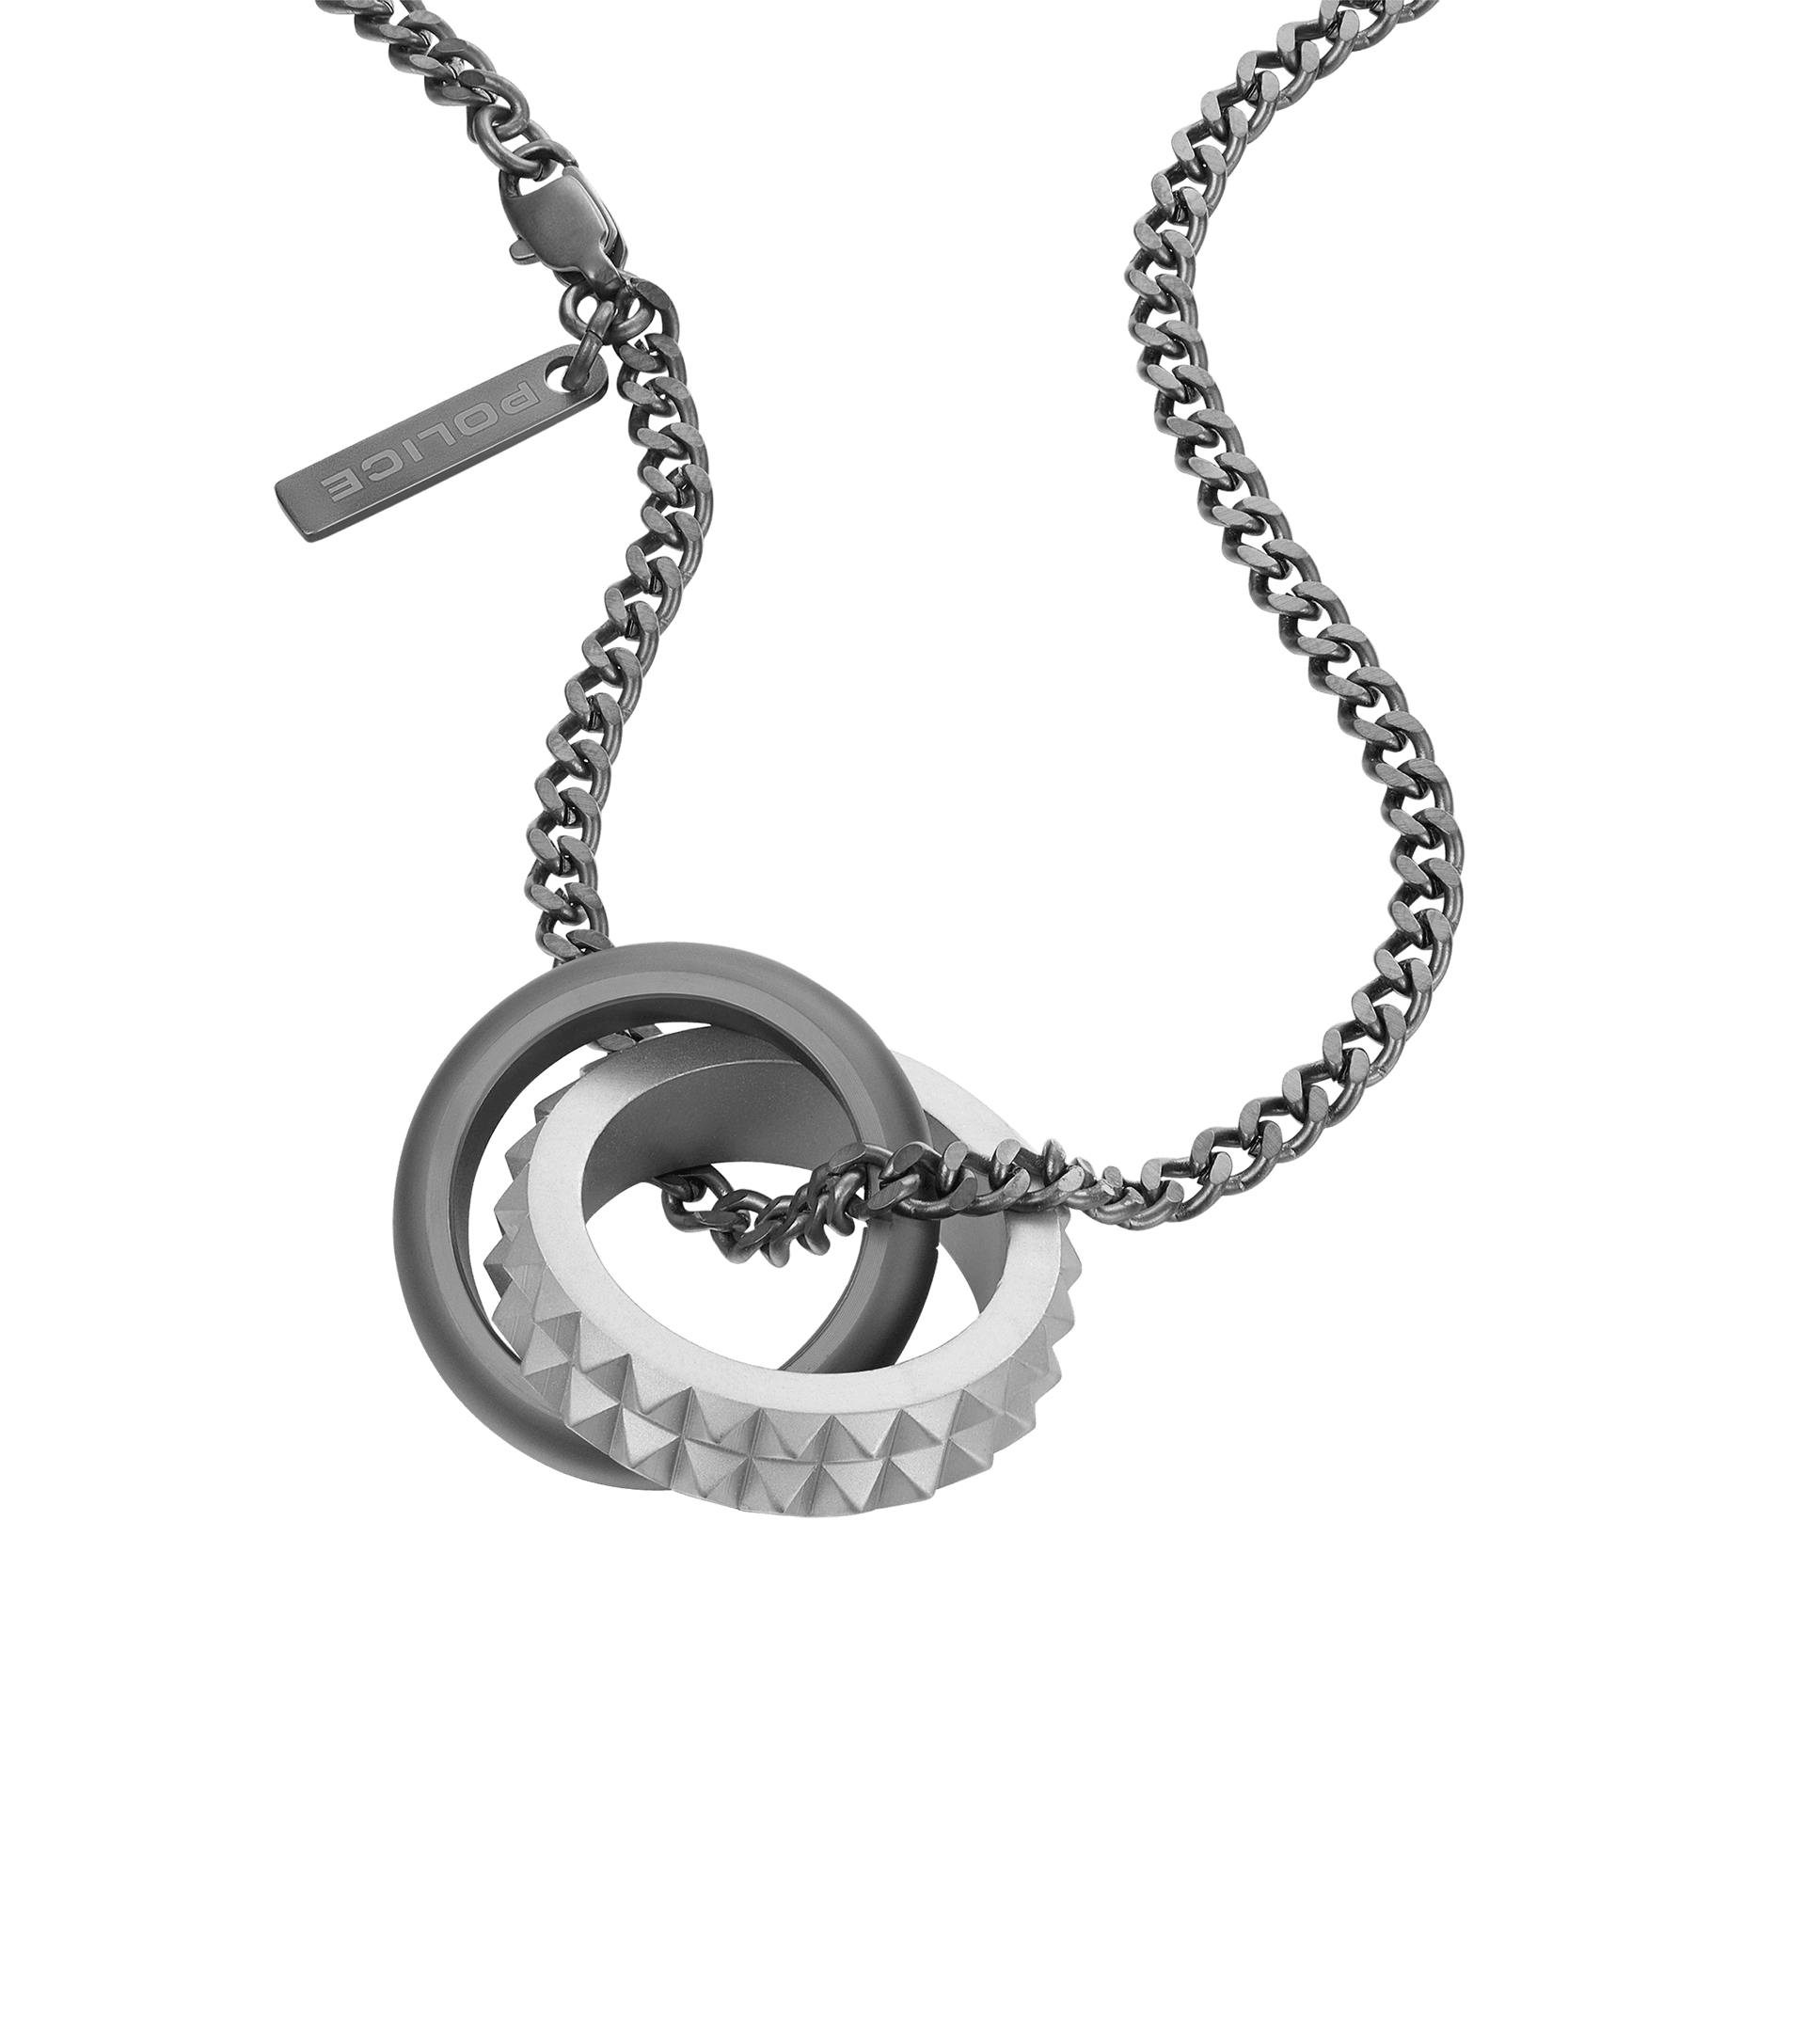 Police jewels - Link Necklace By Police For Men PEAGN0001804